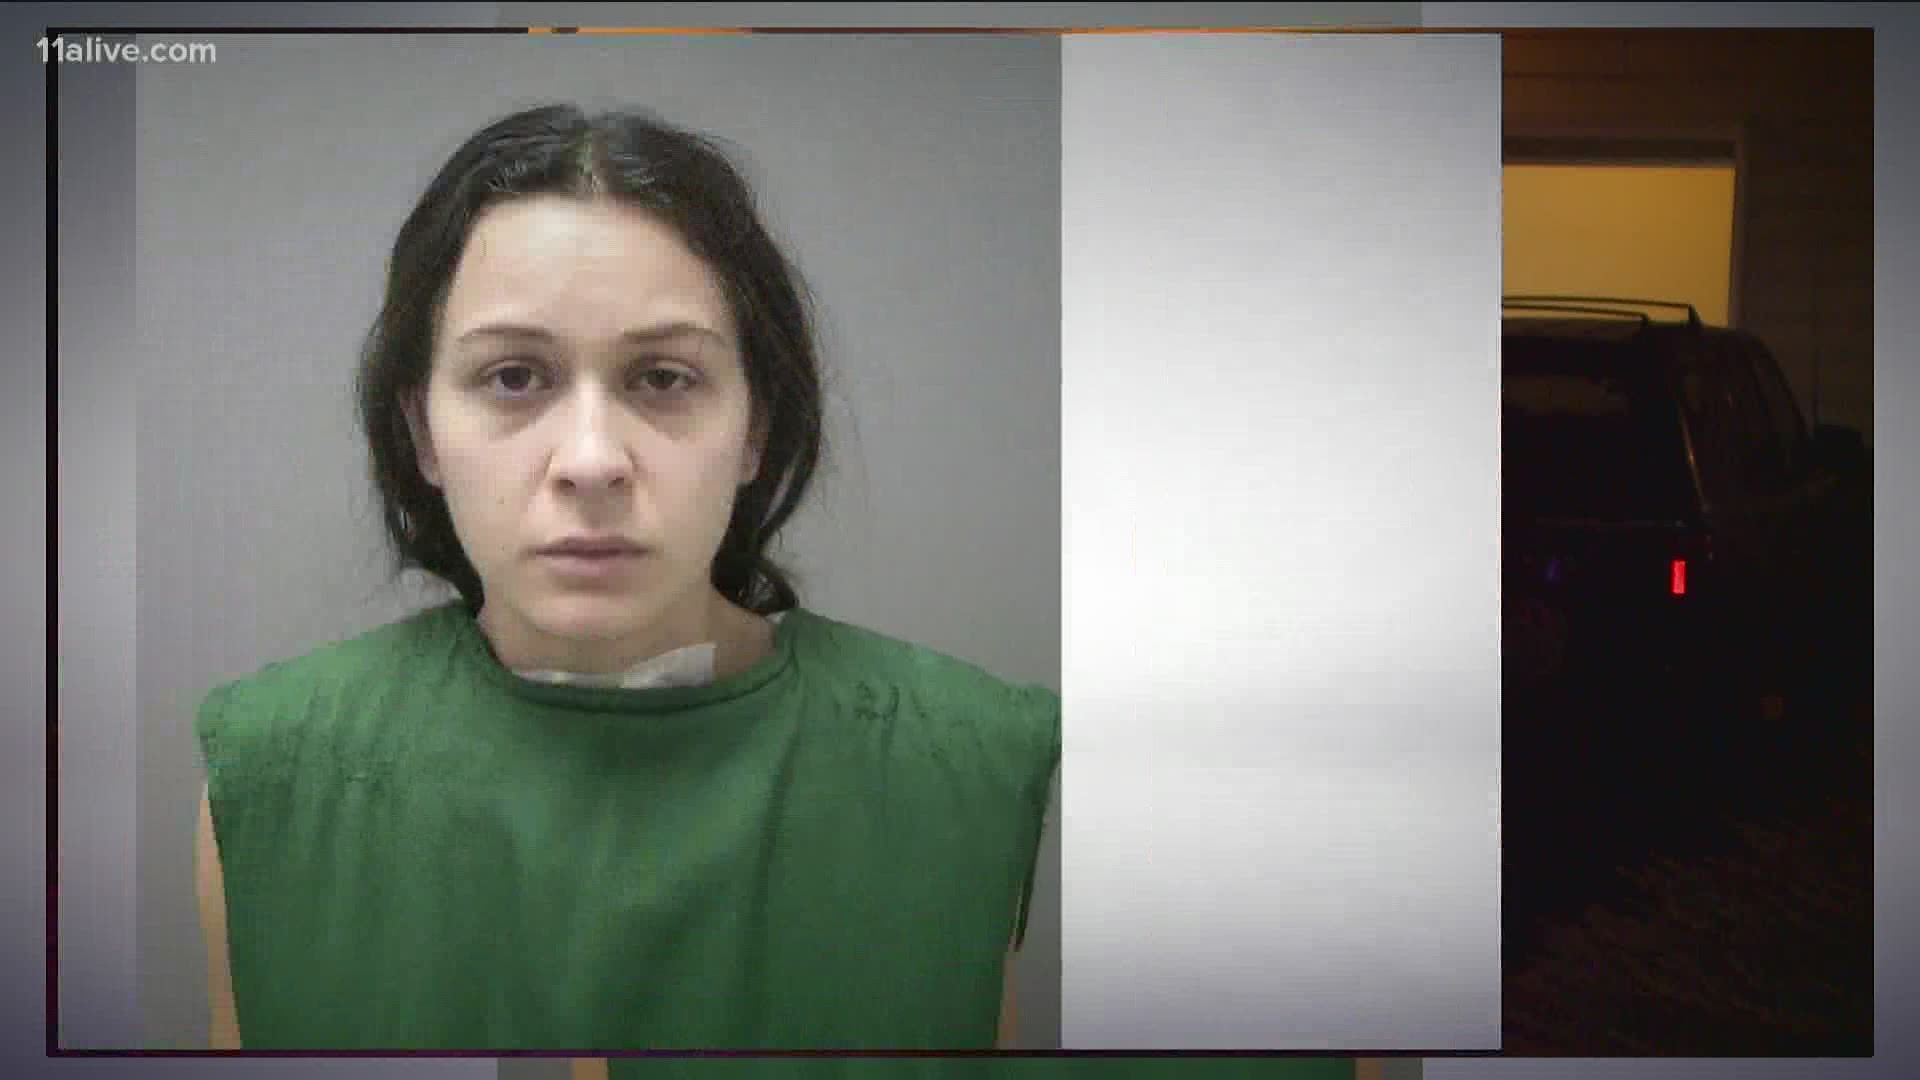 A mother is charged with murder in the stabbing death of her 13-month-old daughter, Canton Police said.